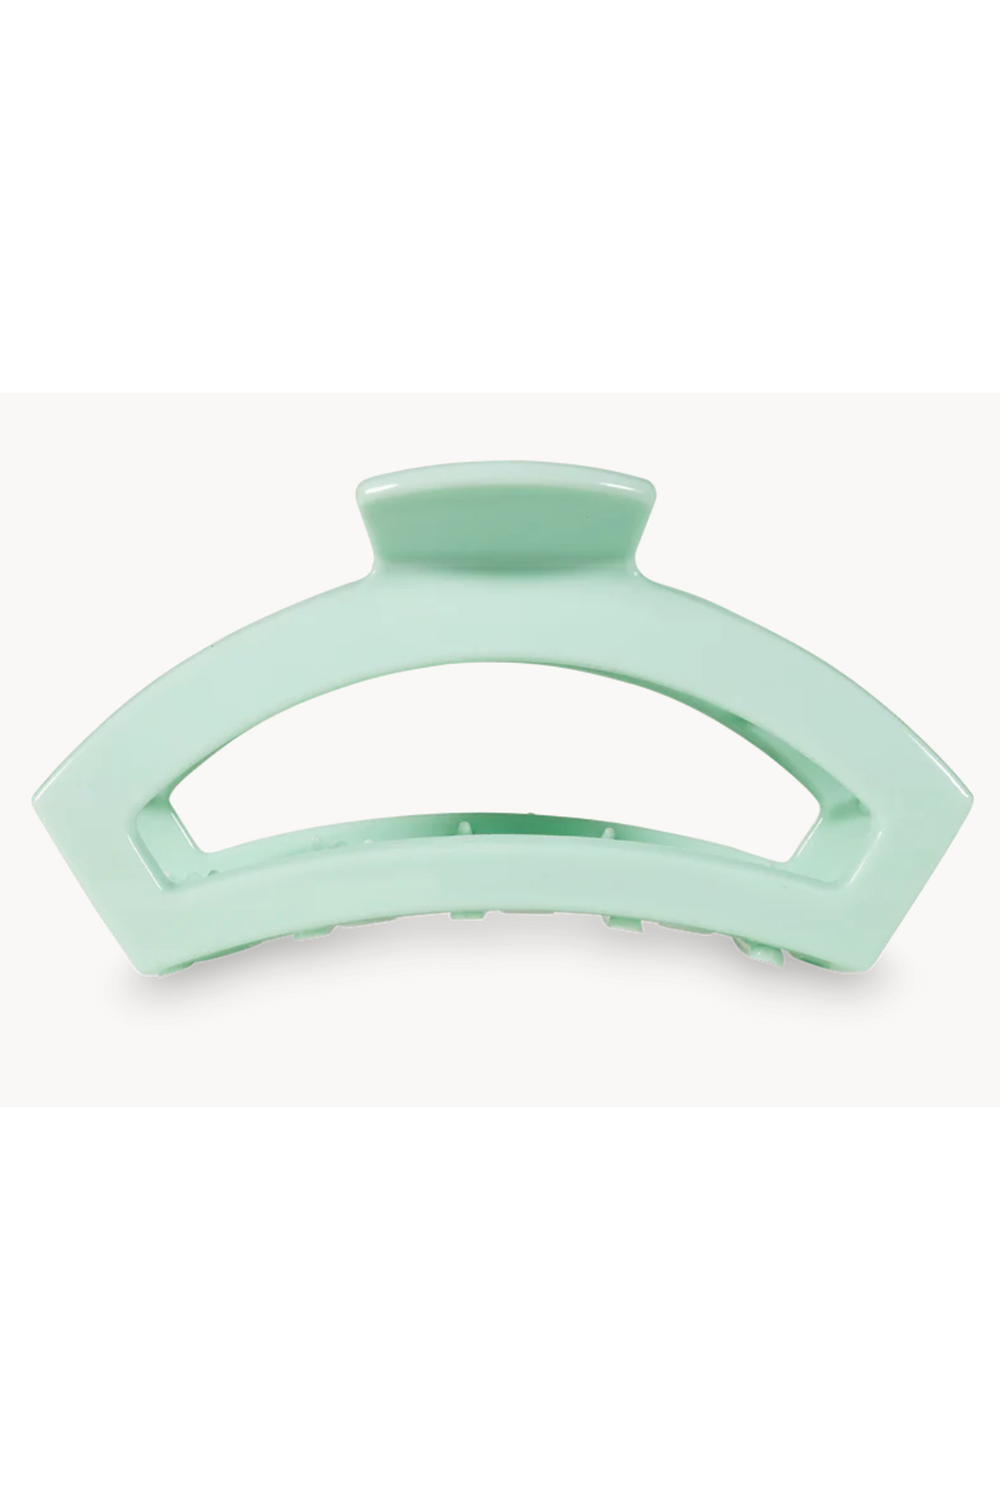 Teleties Open Hair Clip - Mint to Be